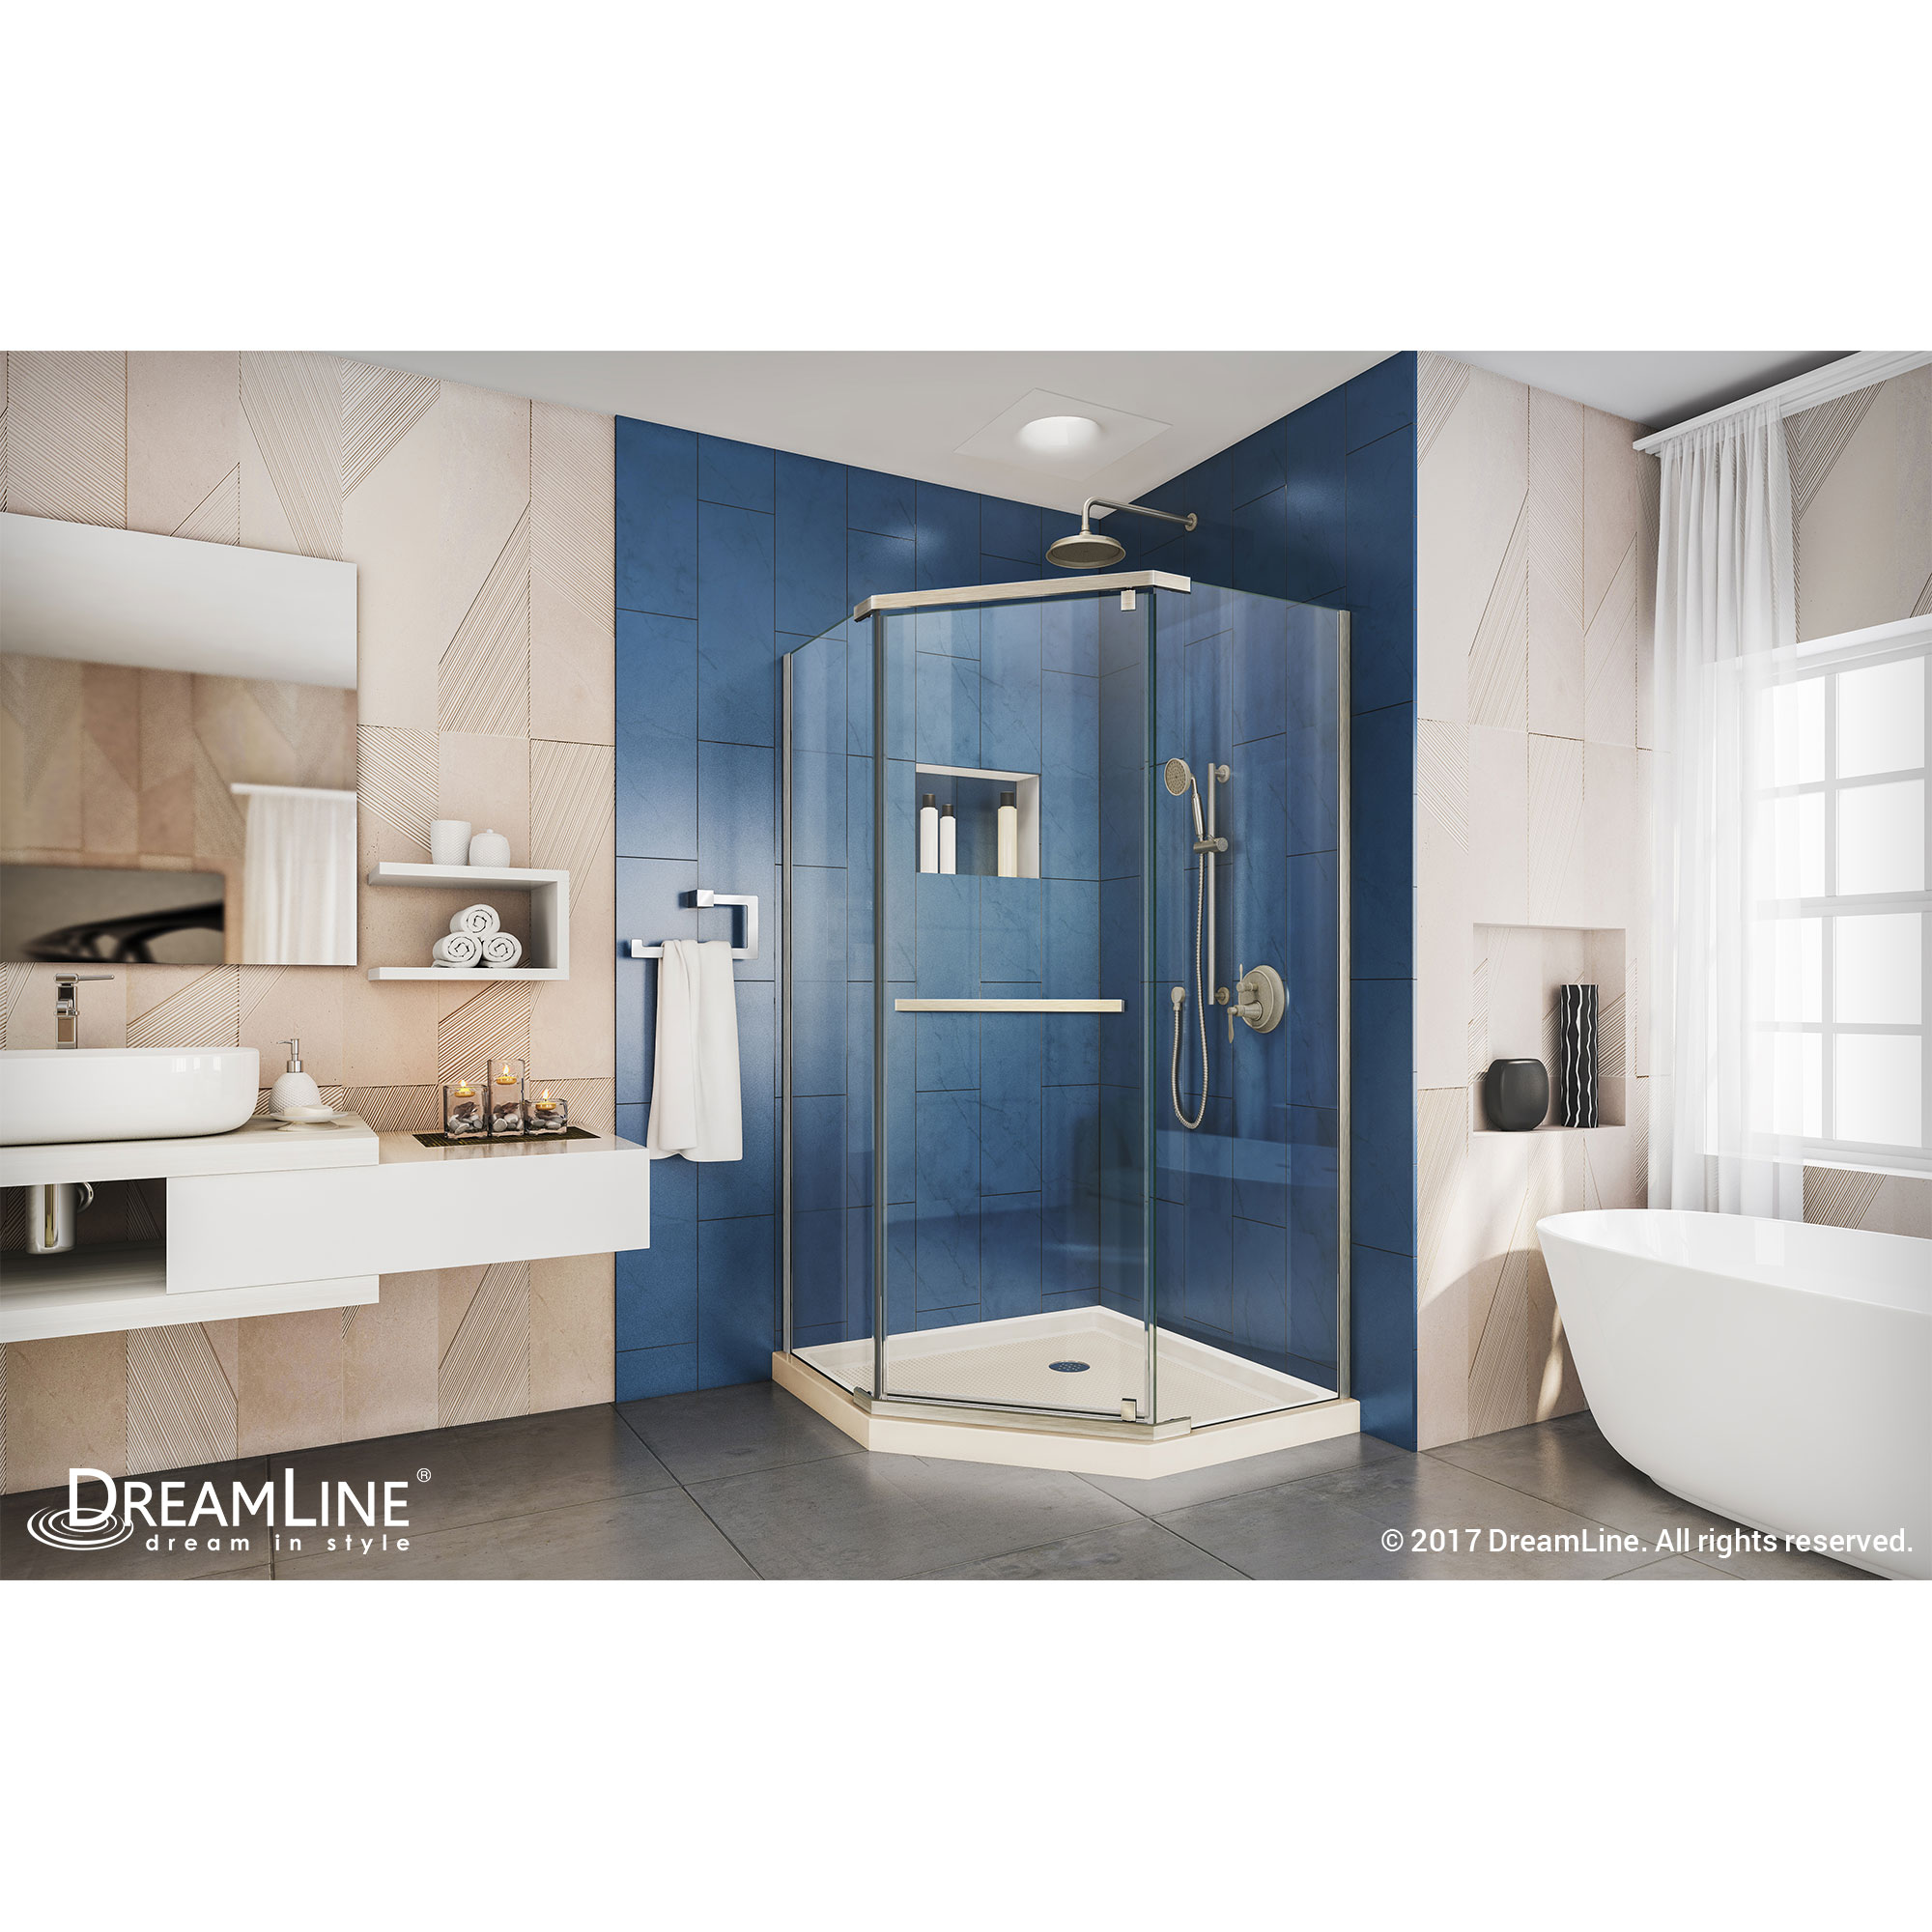 DreamLine Prism 42 in. D x 42 in. W x 74 3/4 H Pivot Shower Enclosure in Brushed Nickel and Corner Drain Biscuit Base Kit